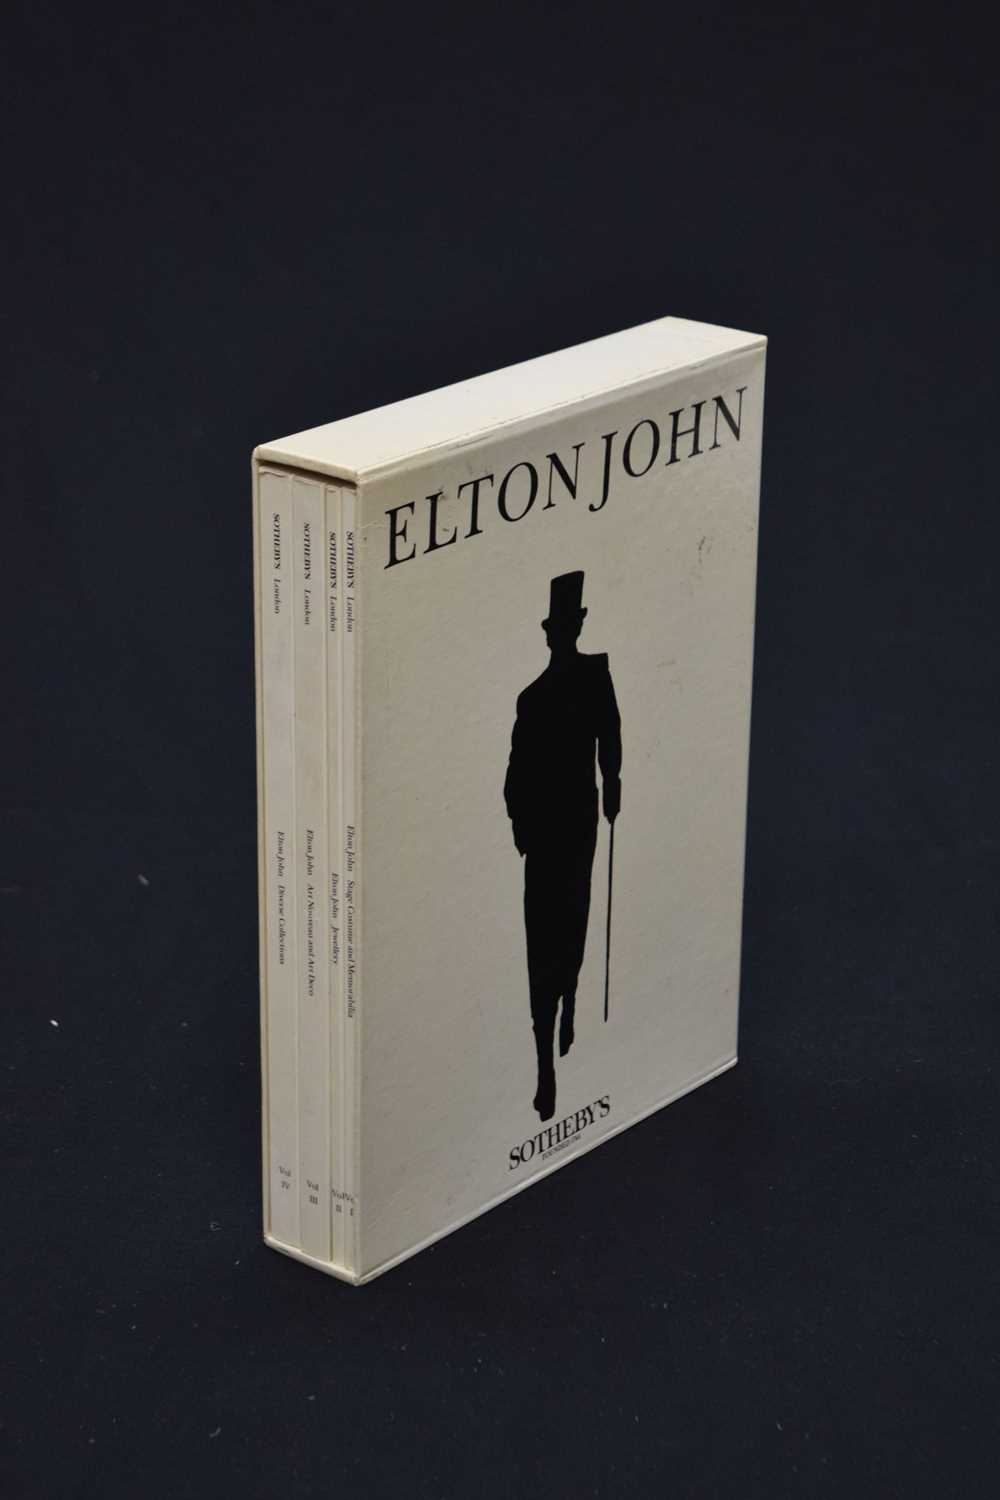 Sotheby's Elton John auction catalogue set from 6th-9th September 1988 - Image 4 of 9